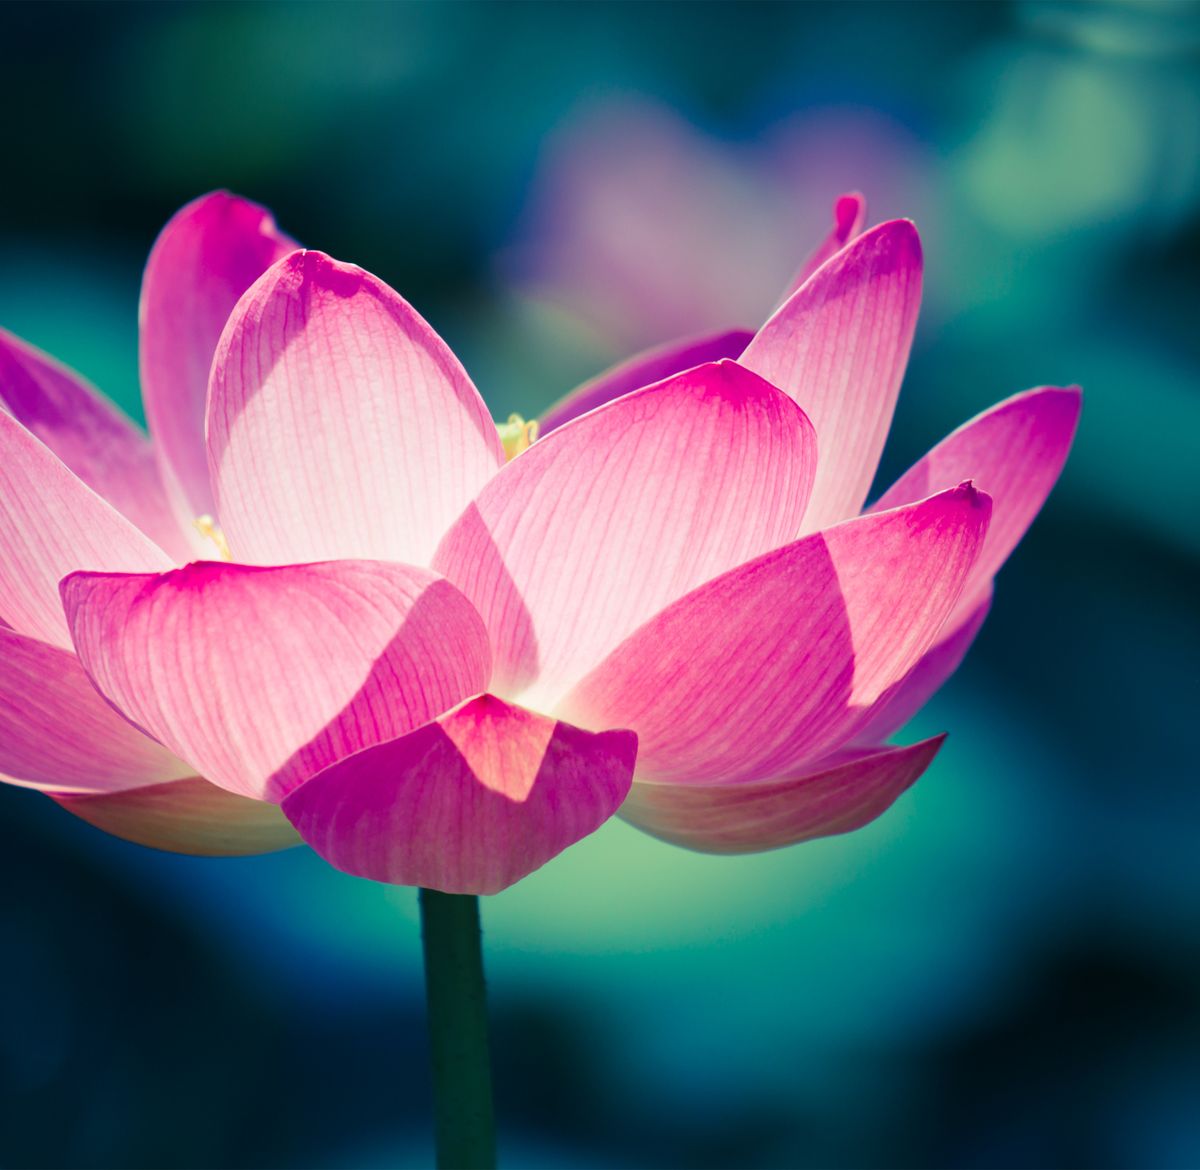 Lotus Flower Meaning - What is the Symbolism Behind the Lotus